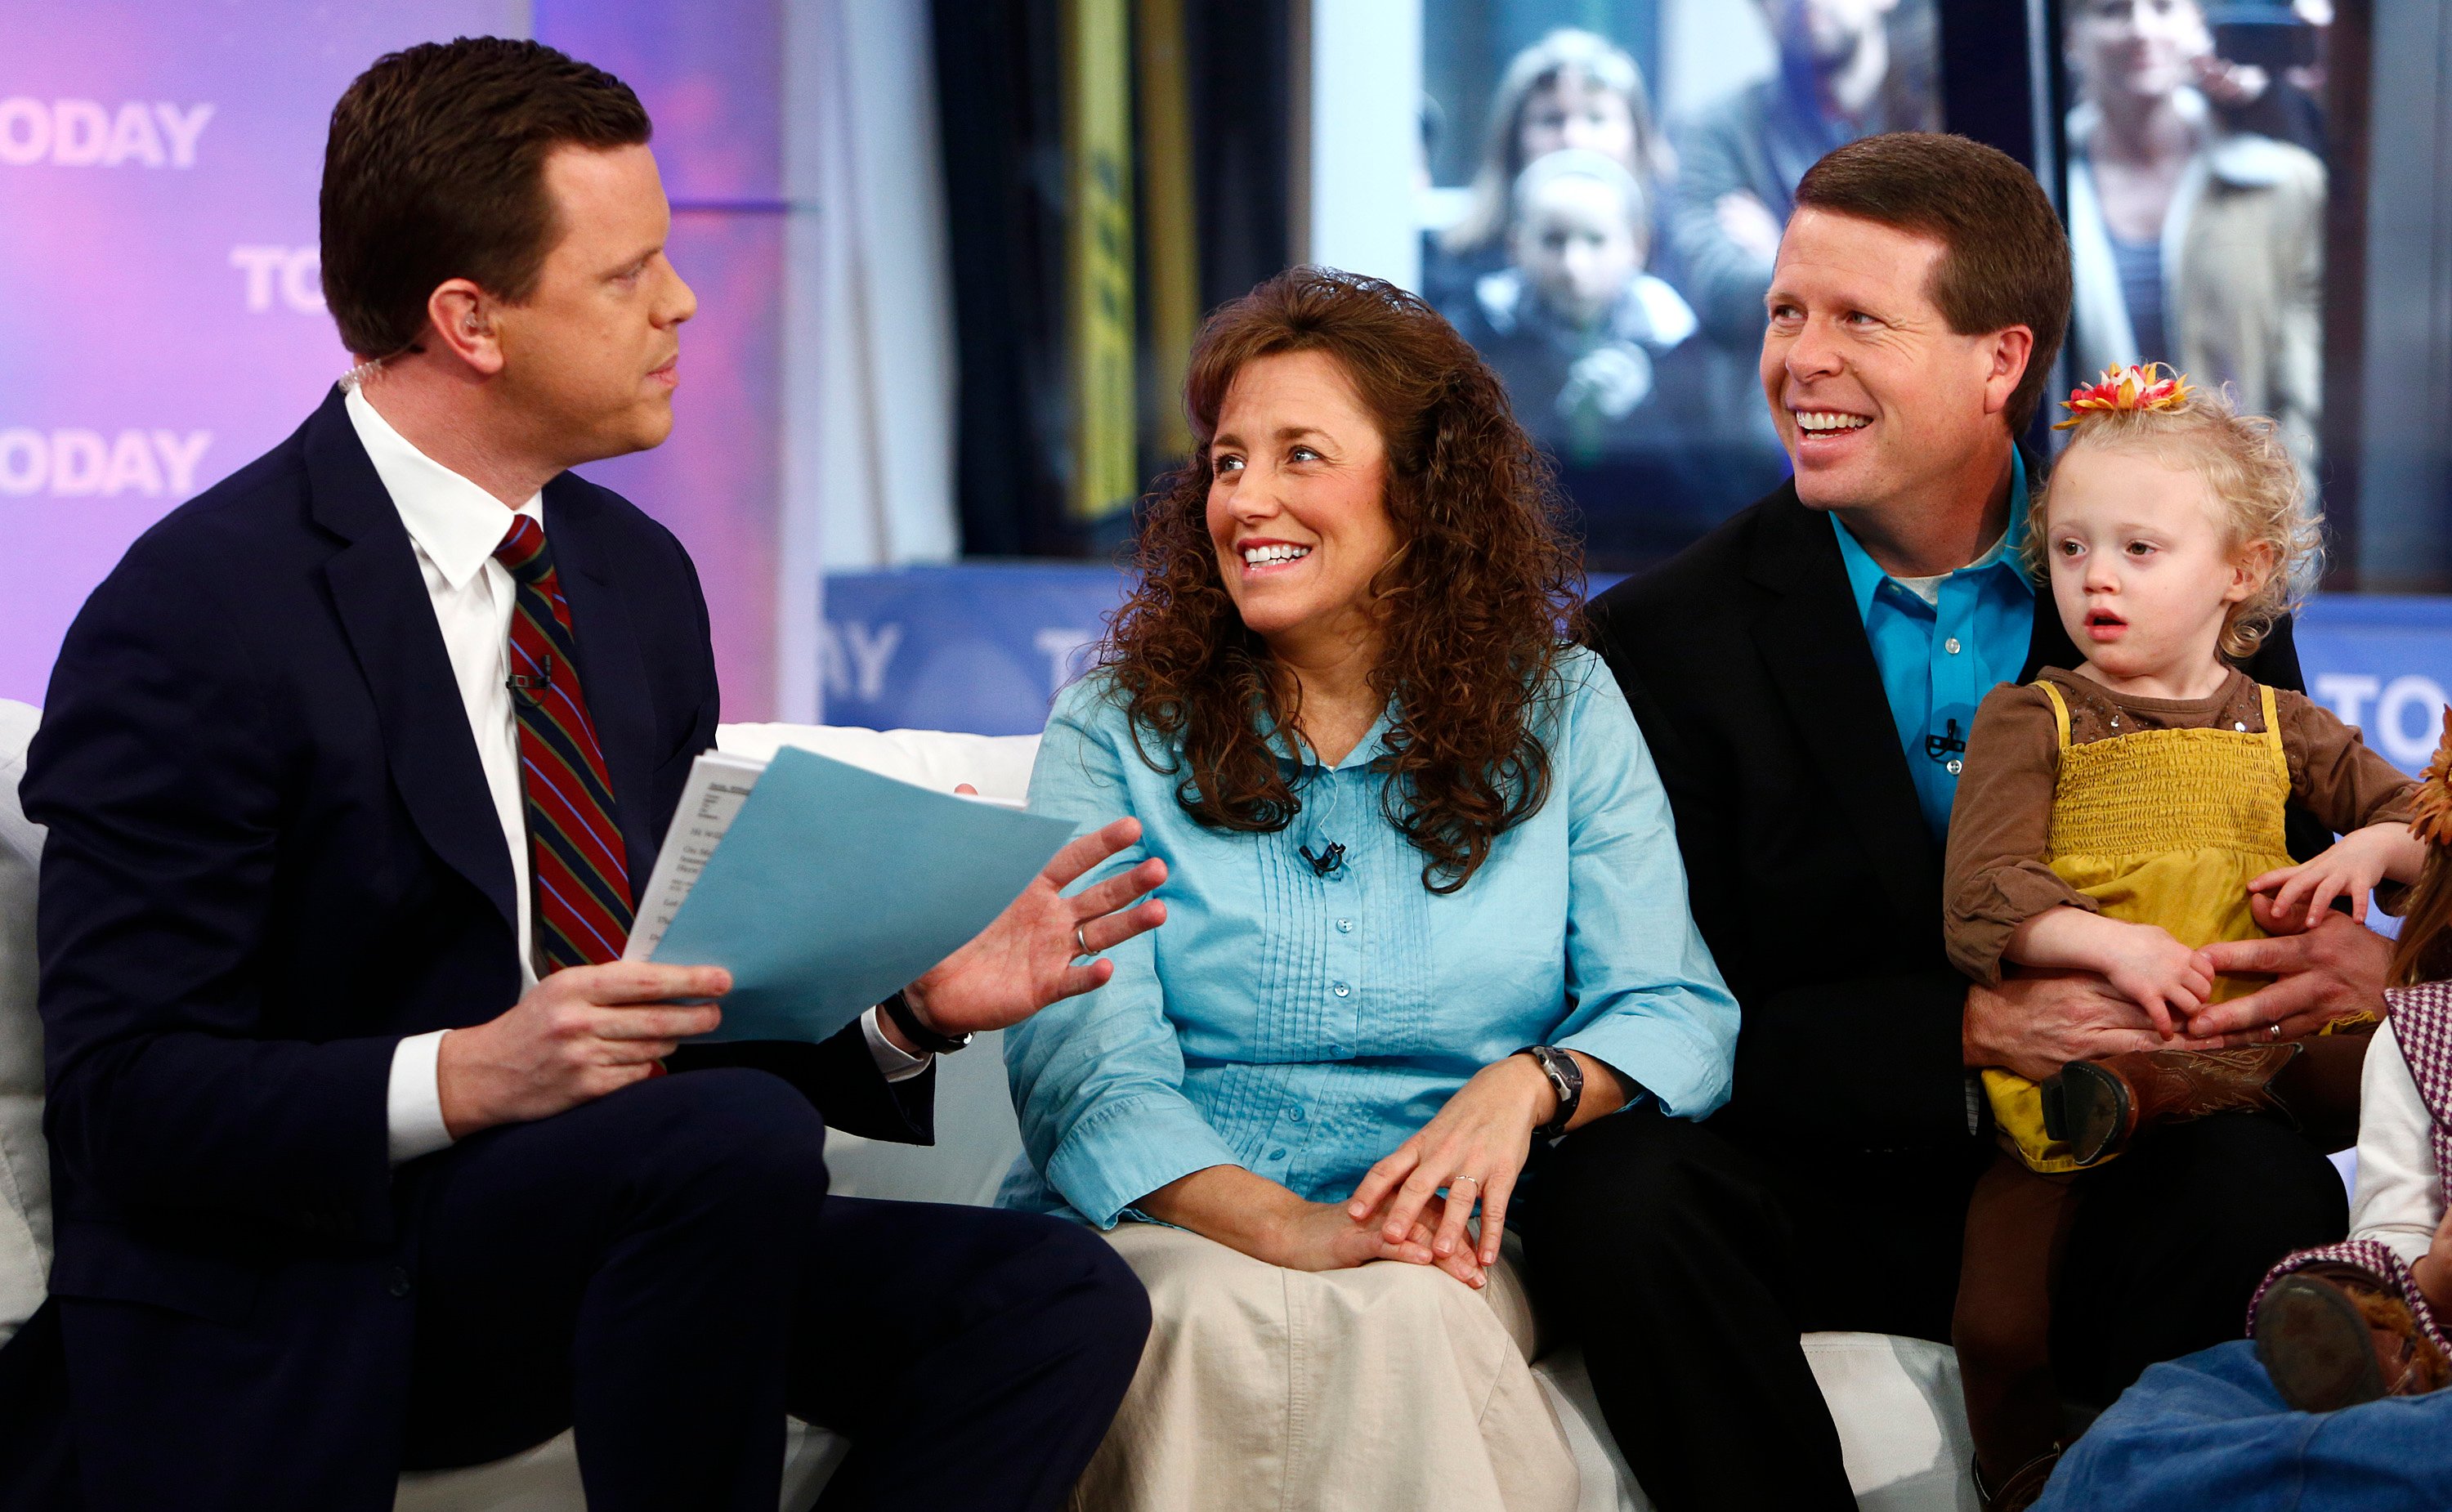 ‘Counting On’: Duggar Family Followers Have Accurately Predicted Several Pregnancies